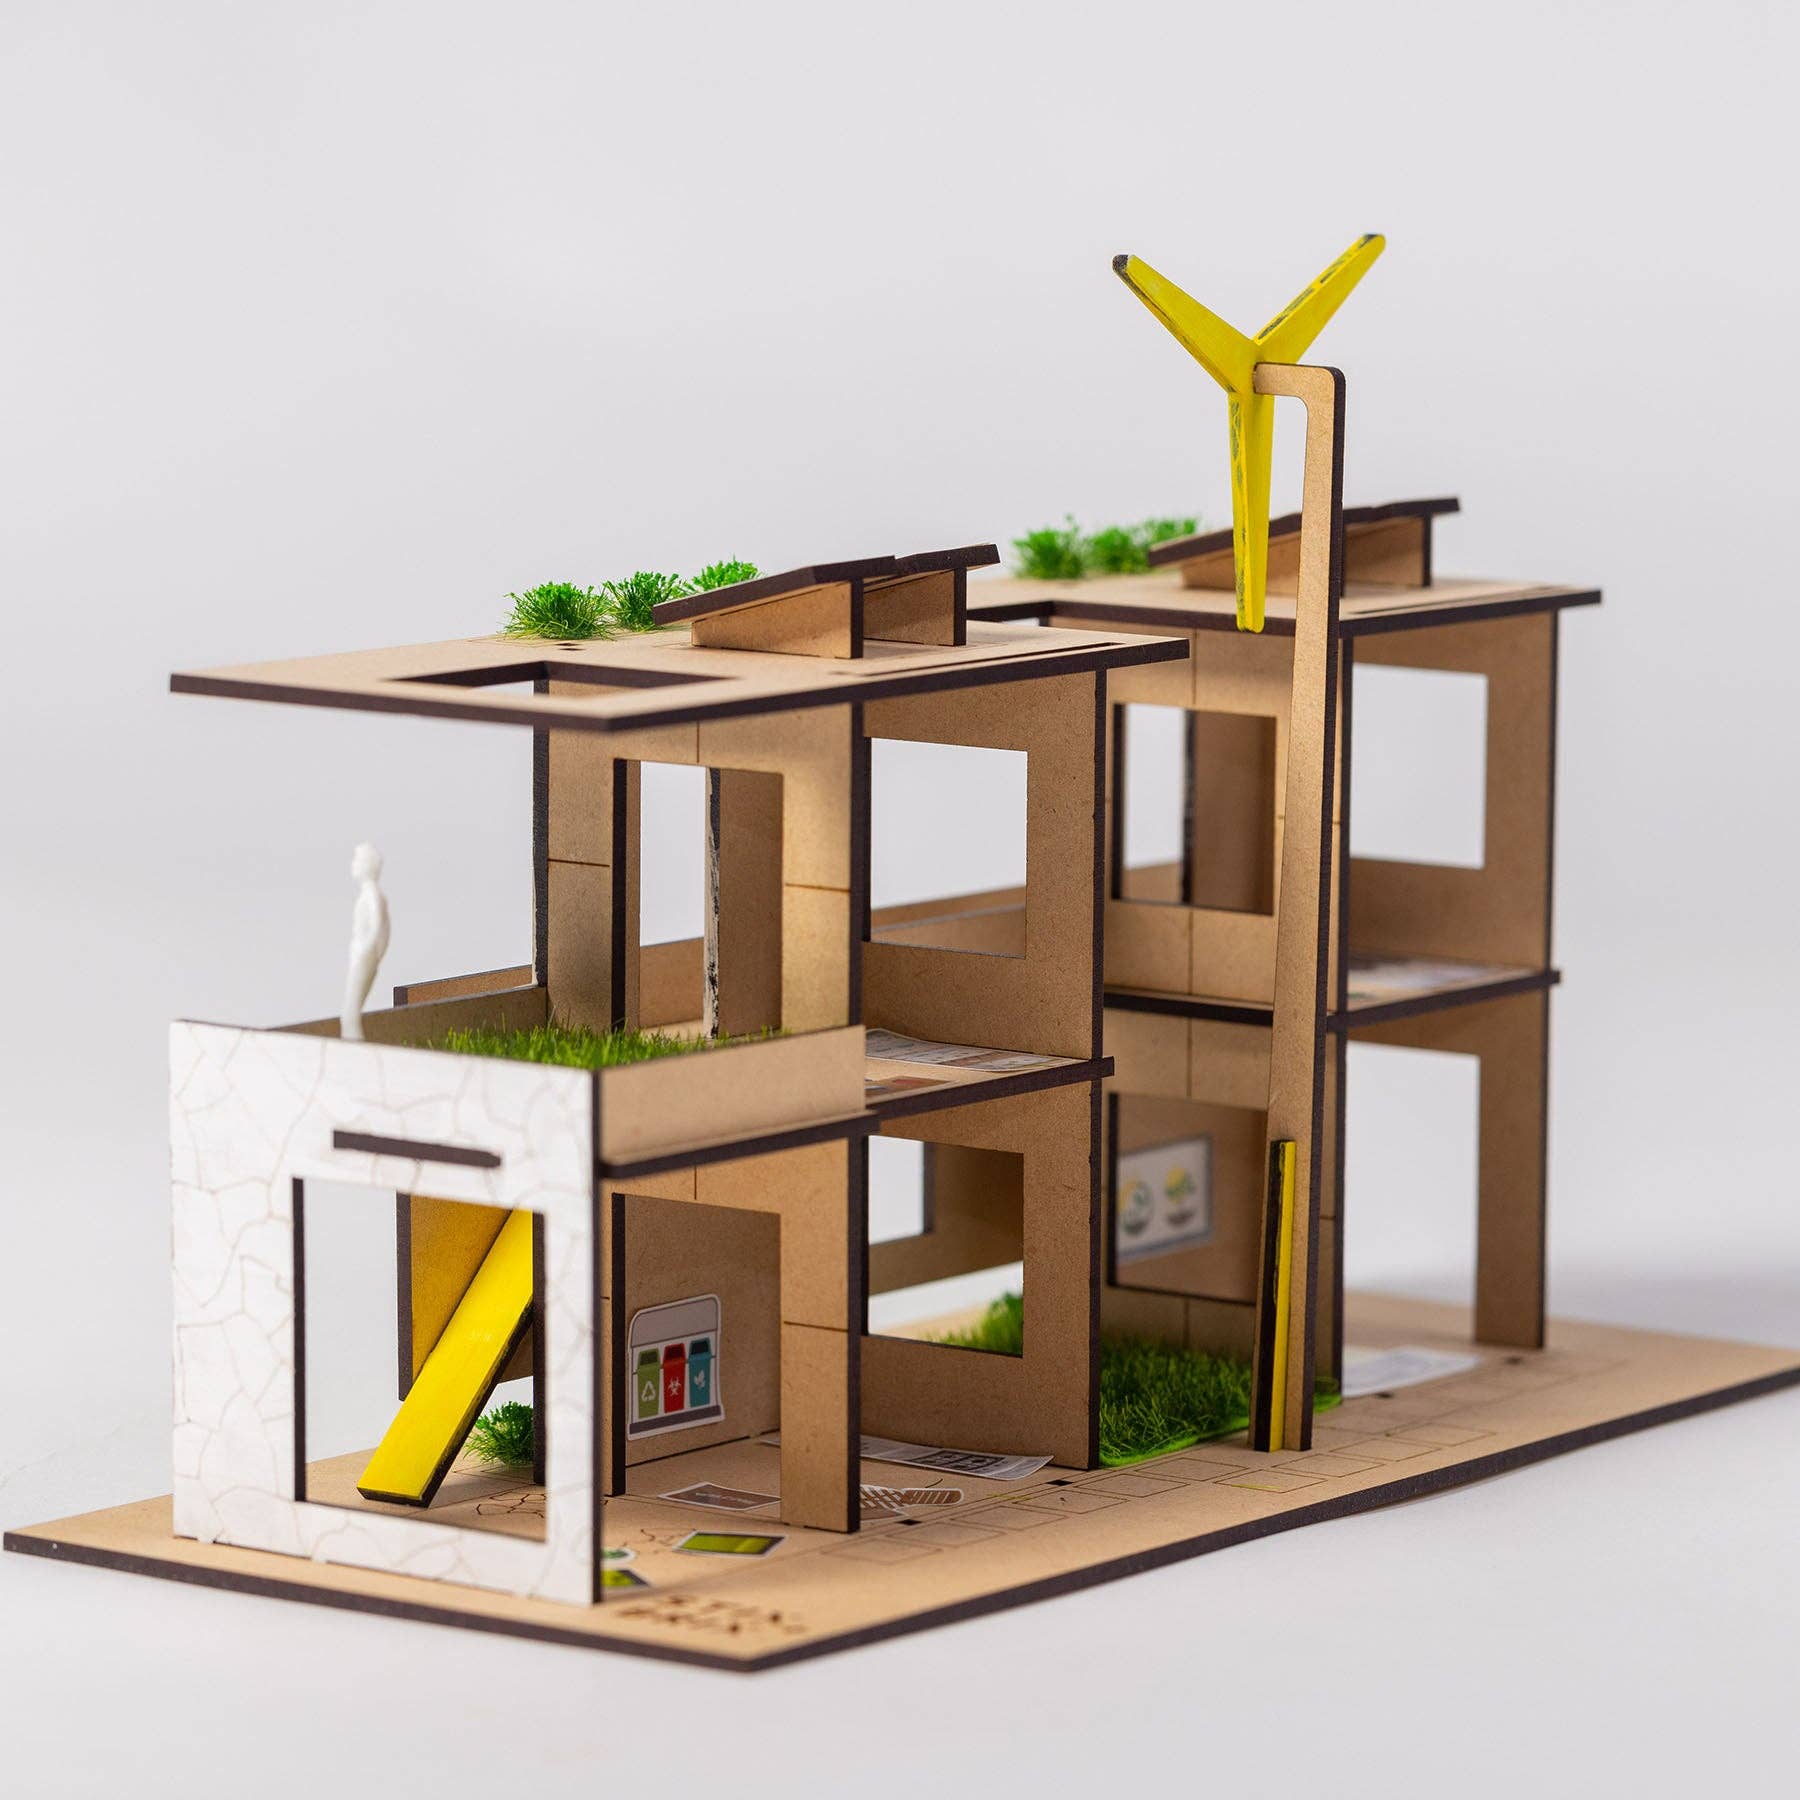 ECO-HOUSE Architectural Model Building Kit